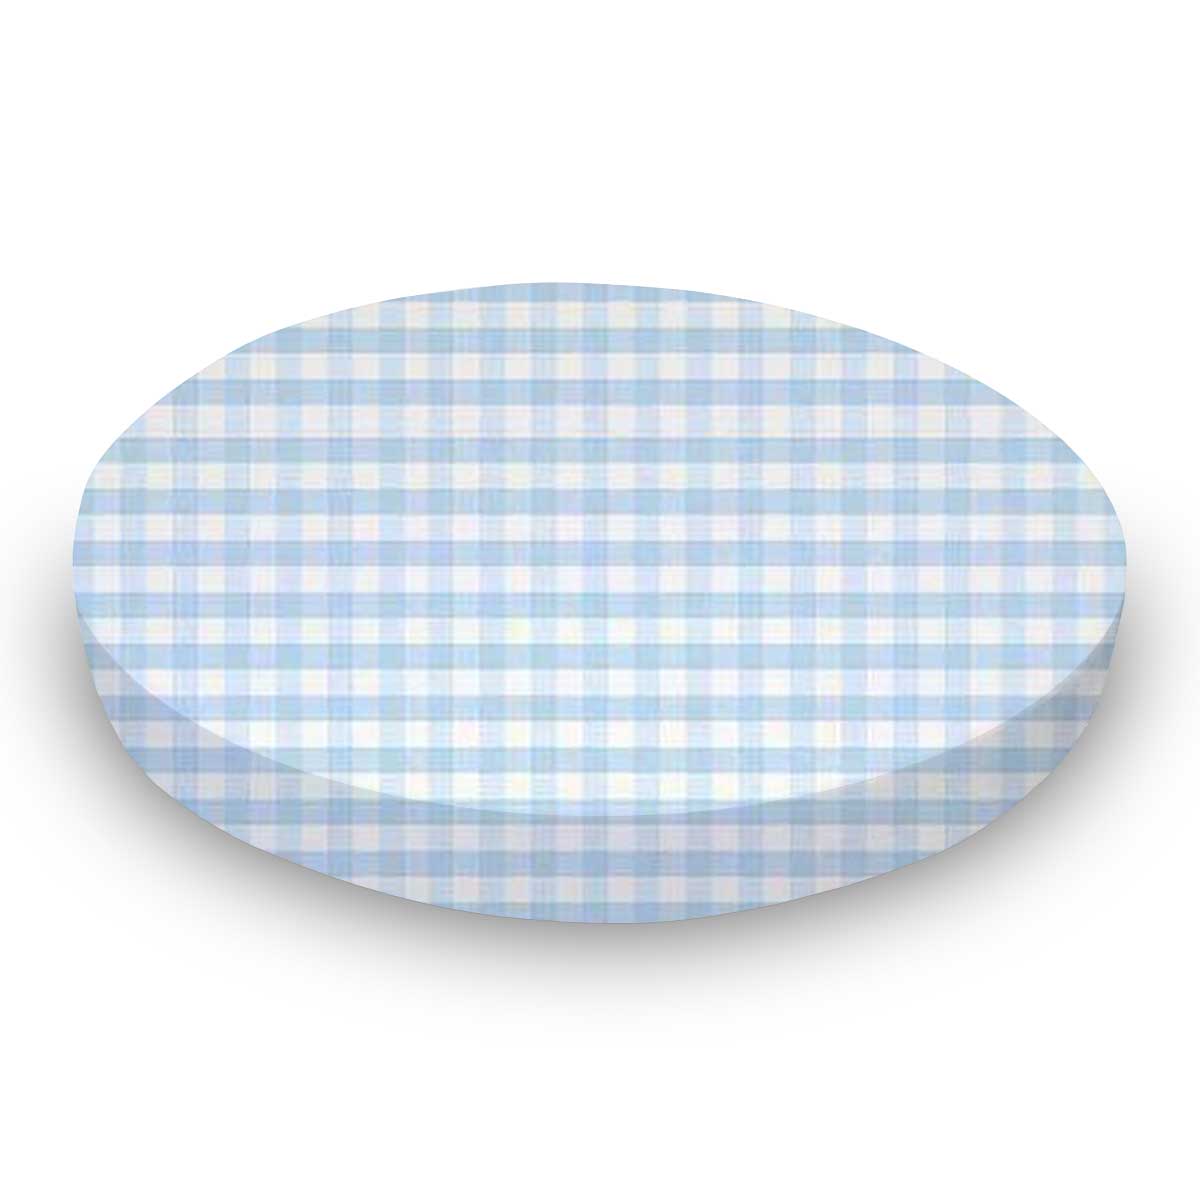 Round Crib - Blue Gingham Jersey Knit - 42`` Fitted